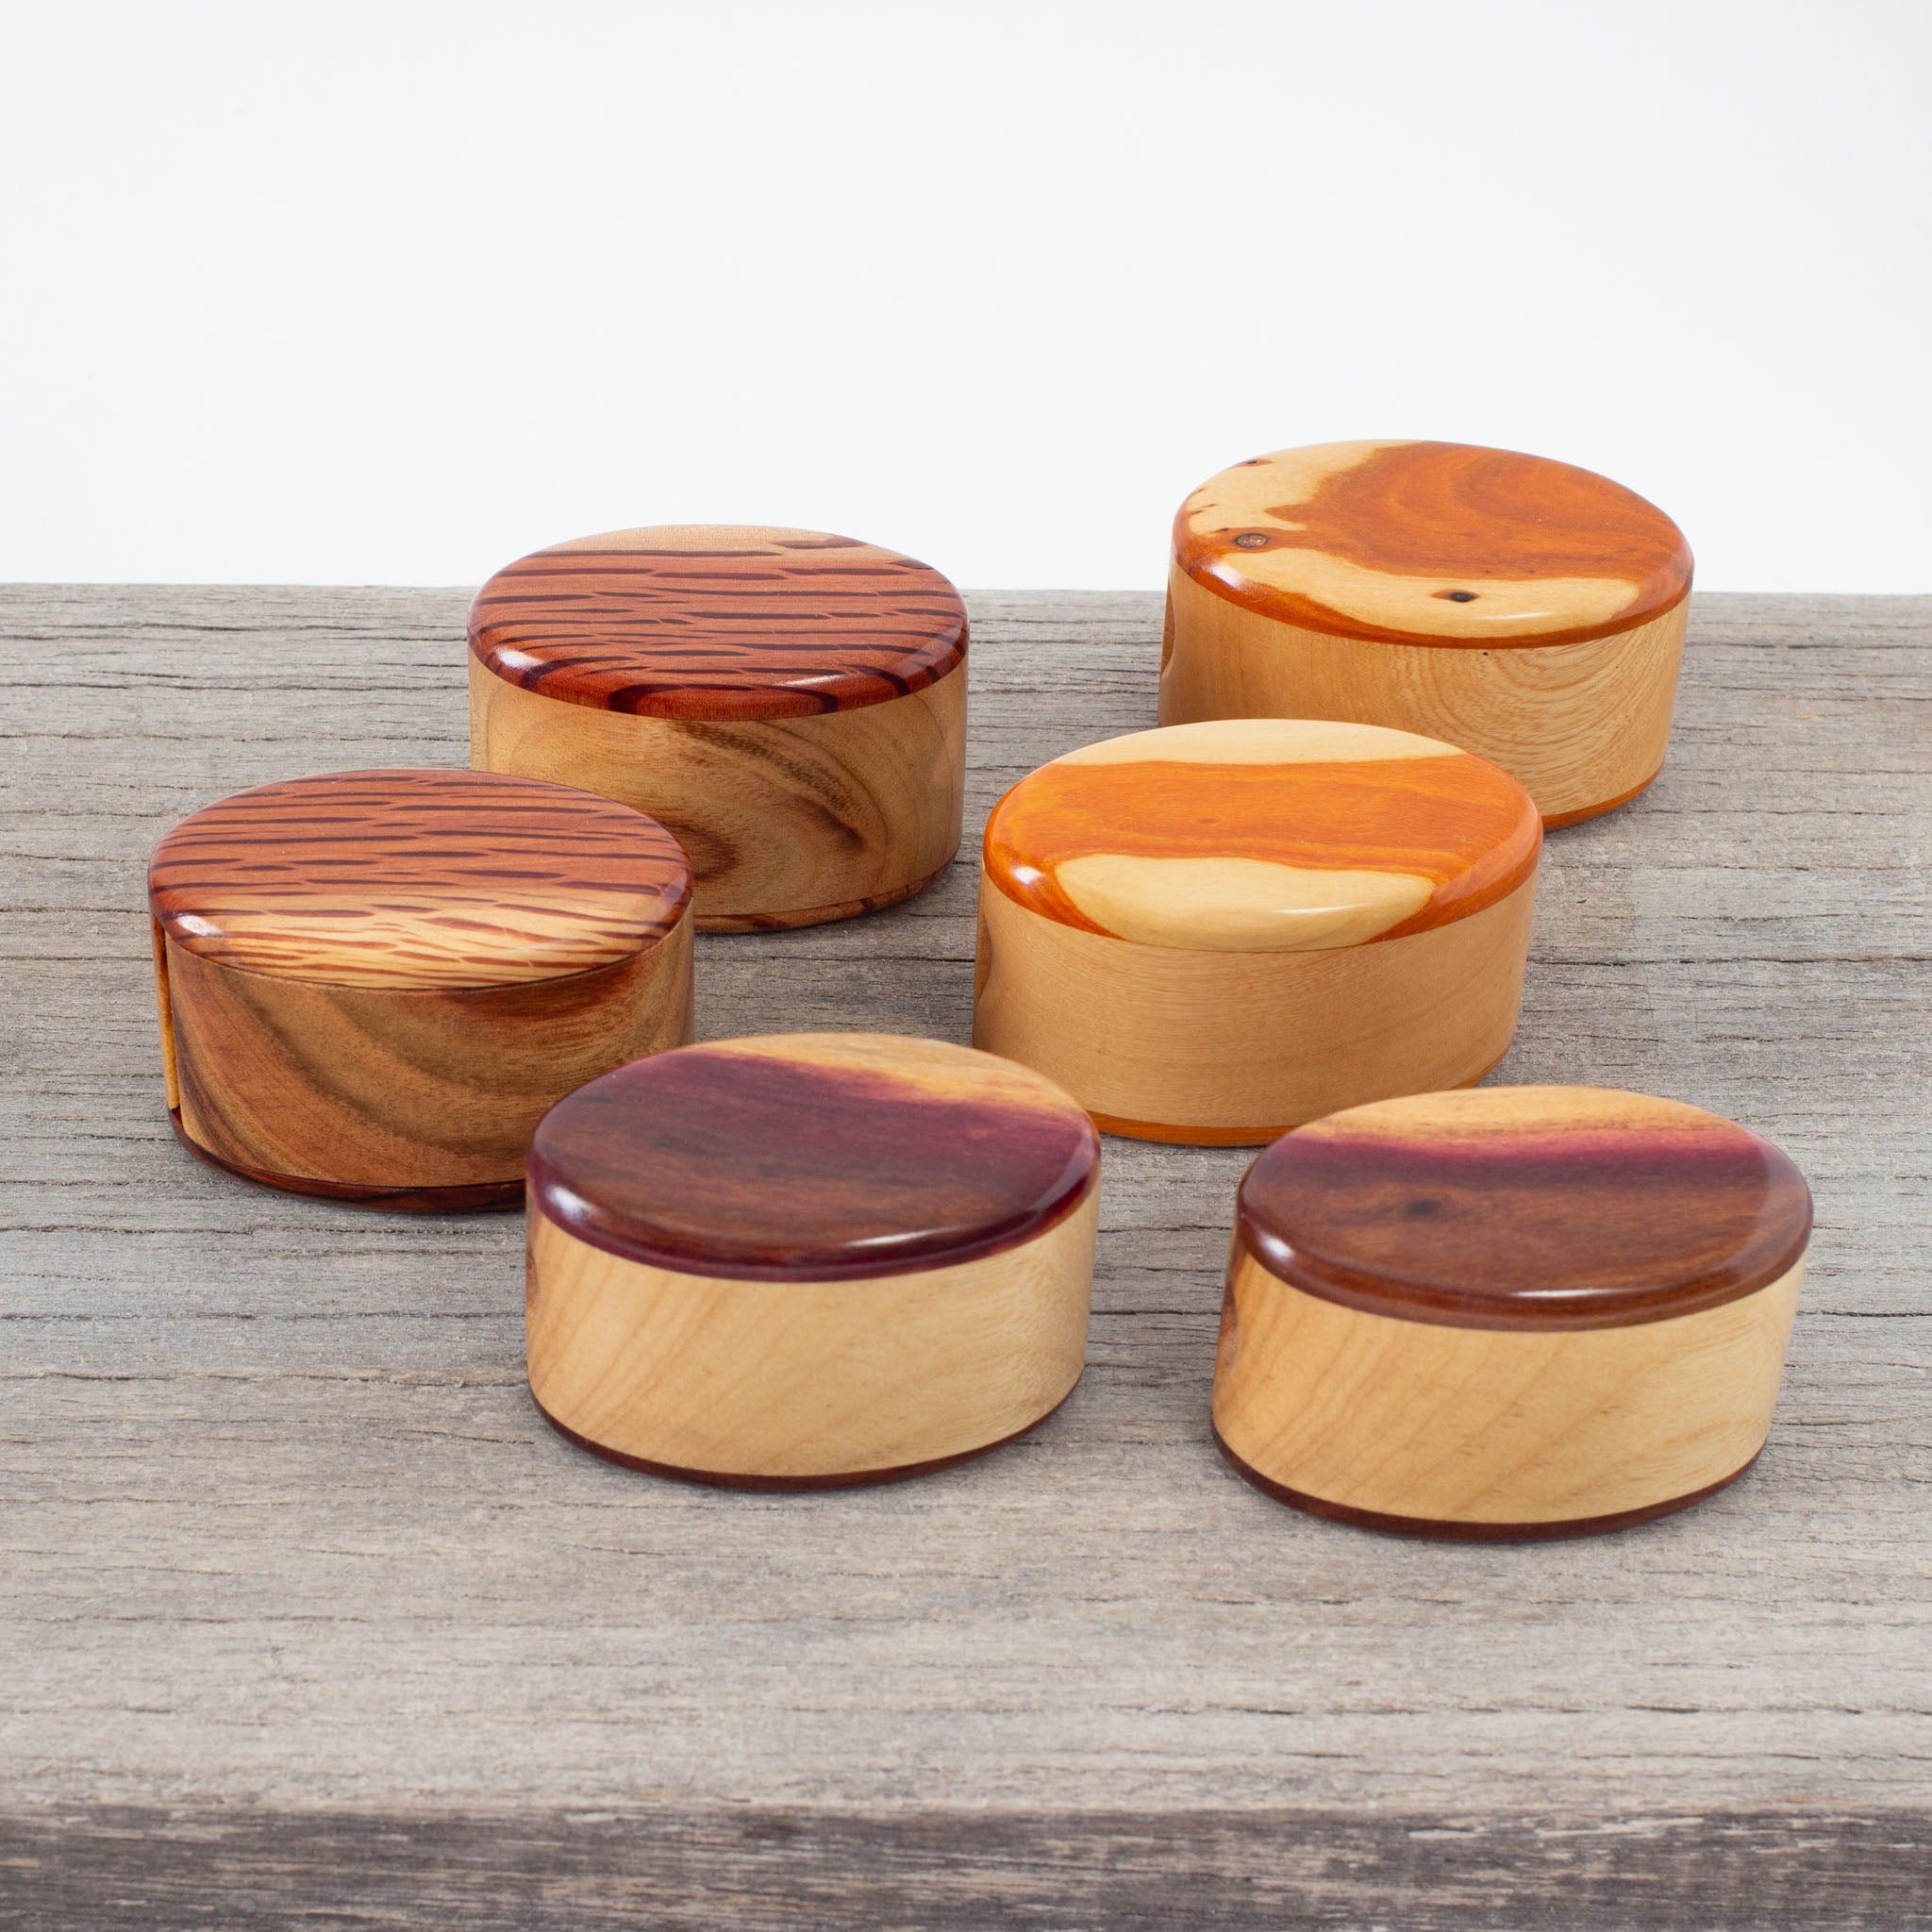 Handmade Wooden Jewelry Boxes